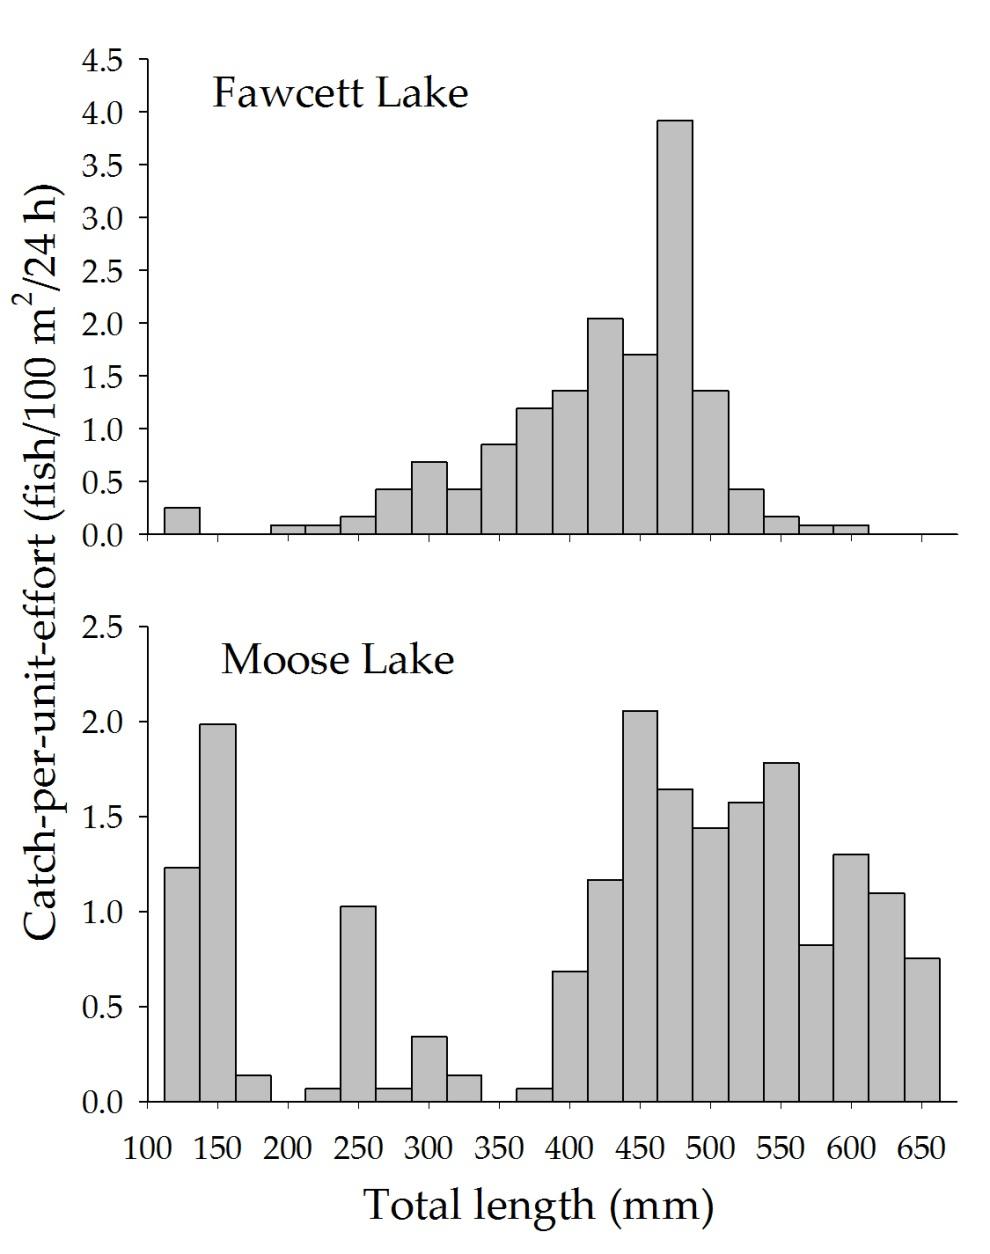 Figure 1. Length-frequency distributions of walleye from Fawcett and Moose lakes, Alberta, during the 2011 gill netting survey.